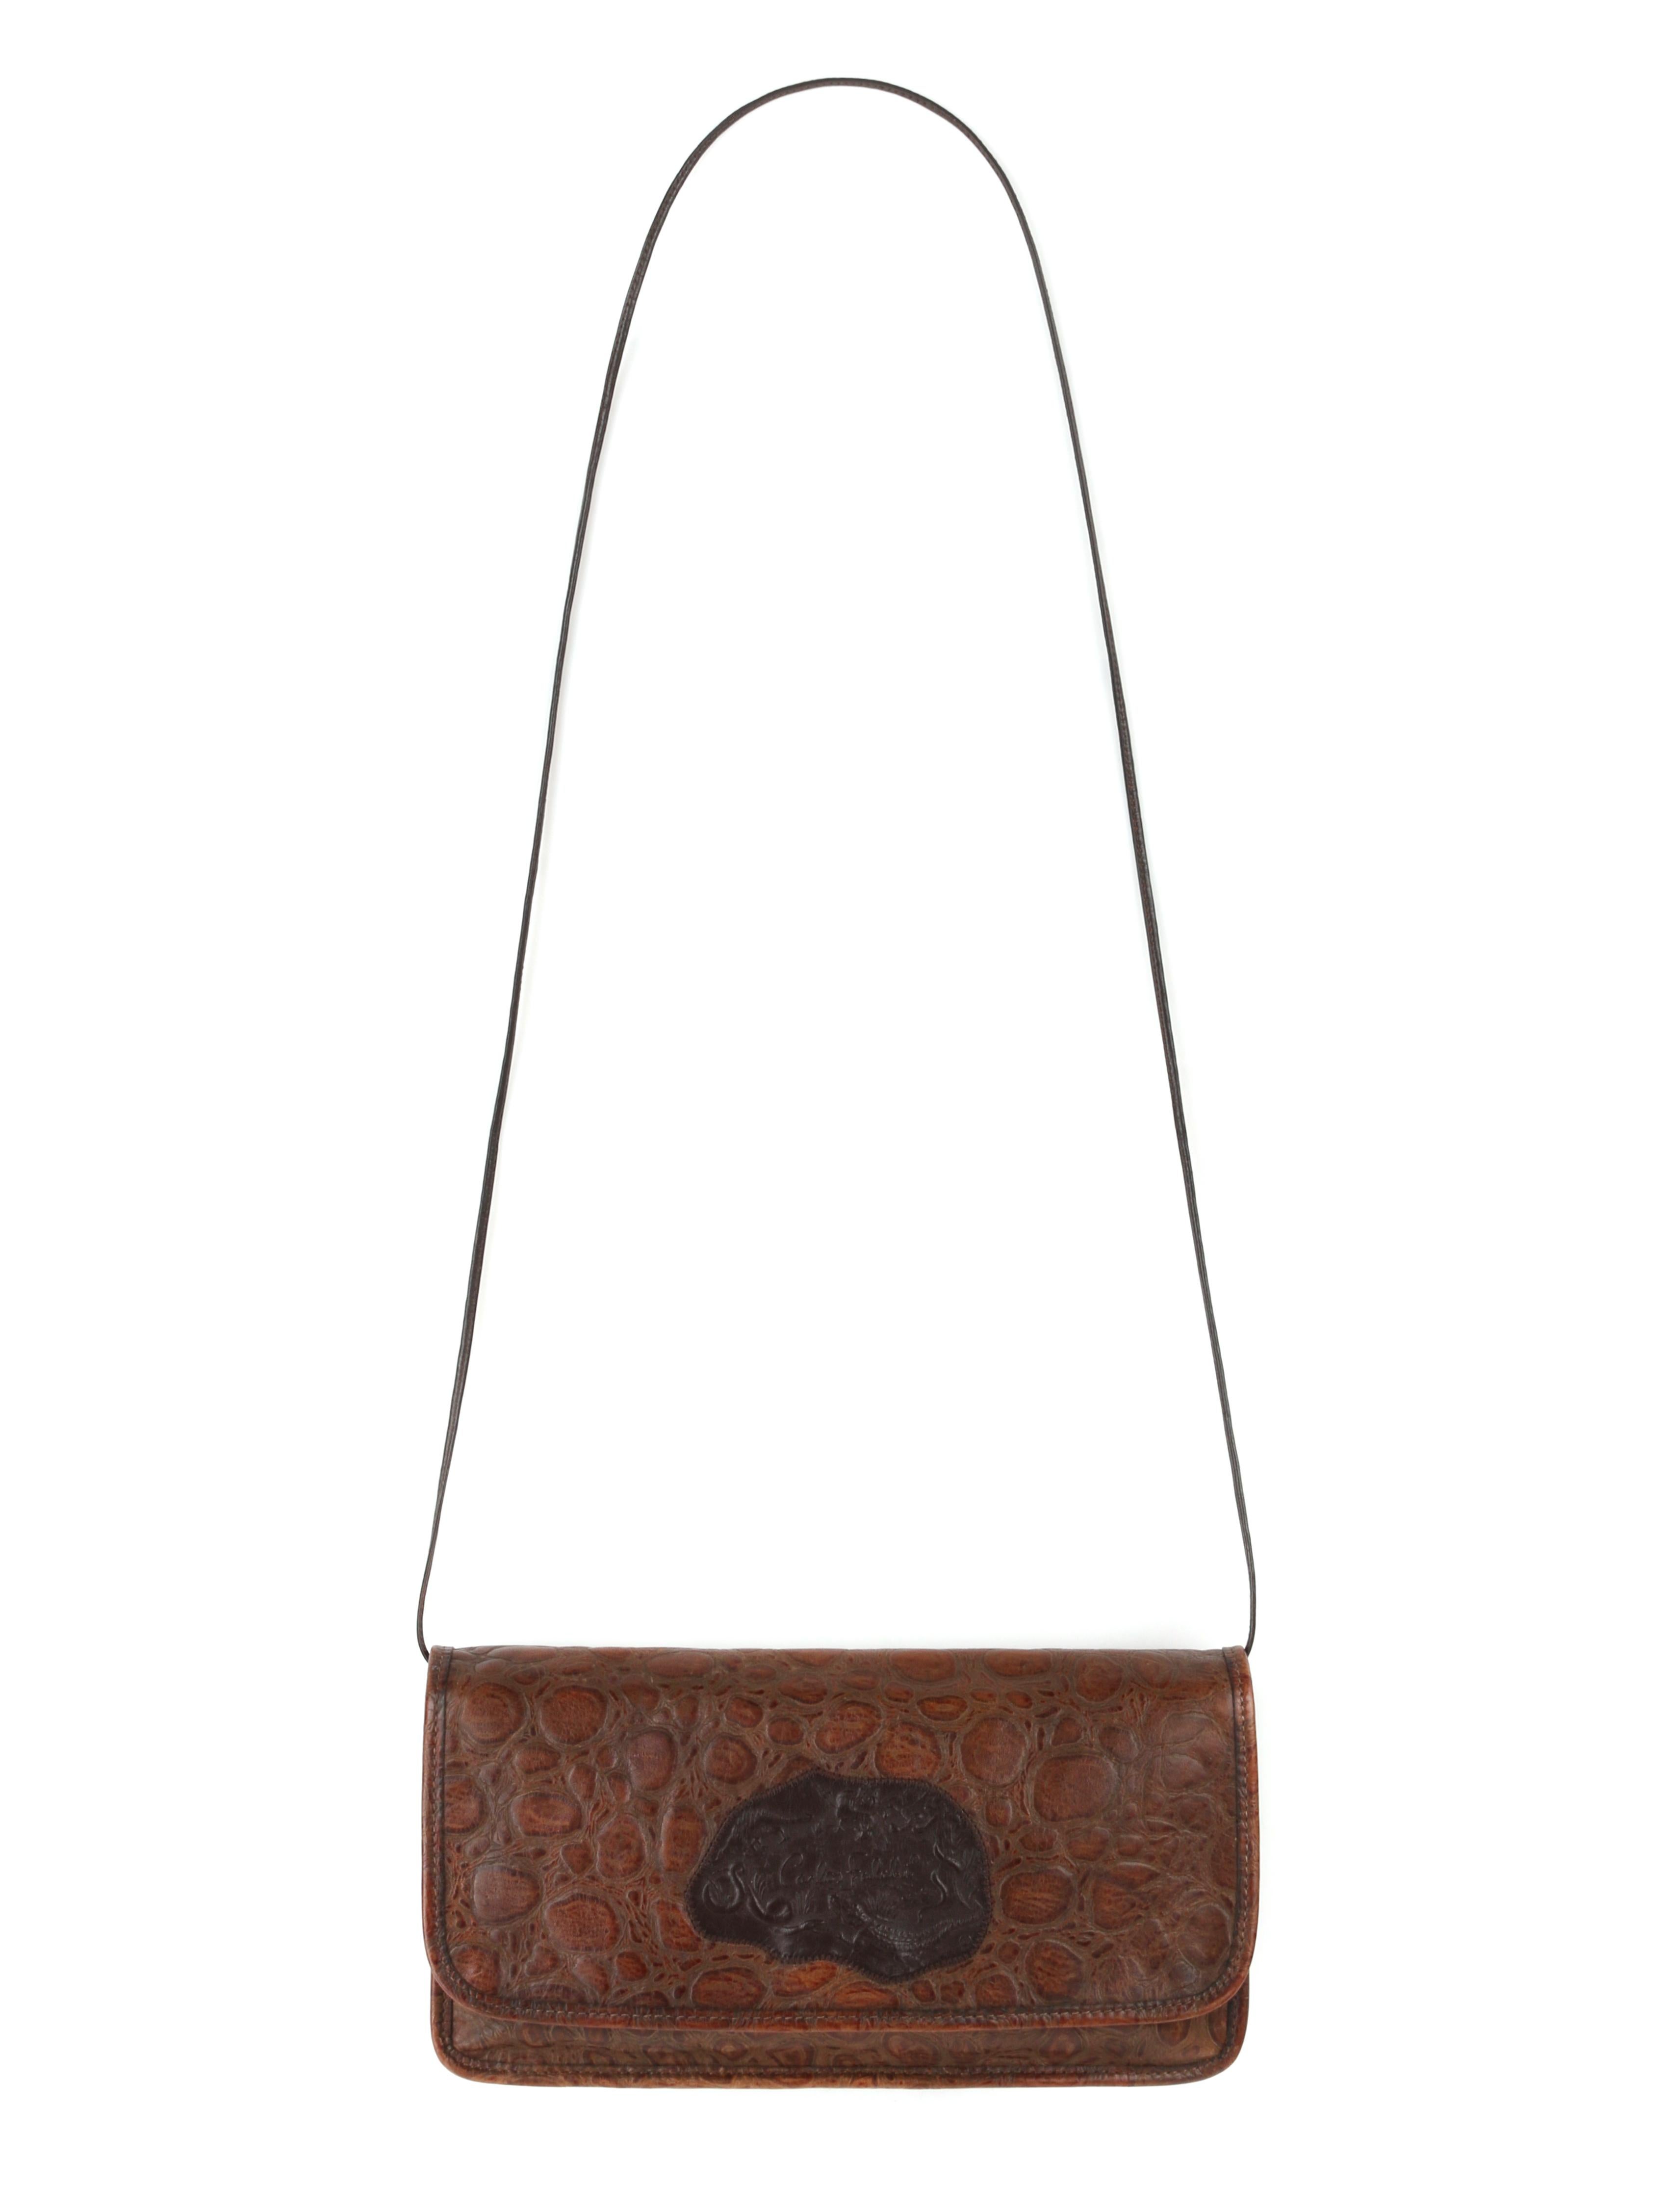 CARLOS FALCHI c.1990’s Brown Embossed Leather Patch Detail Flap Shoulder Bag 
 
Circa: 1990’s
Style: Flap shoulder bag
Color(s): Shades of brown
Lined: Yes
Unmarked Fabric Content (feel of): Leather (shell/interior); metal (closures)
Additional